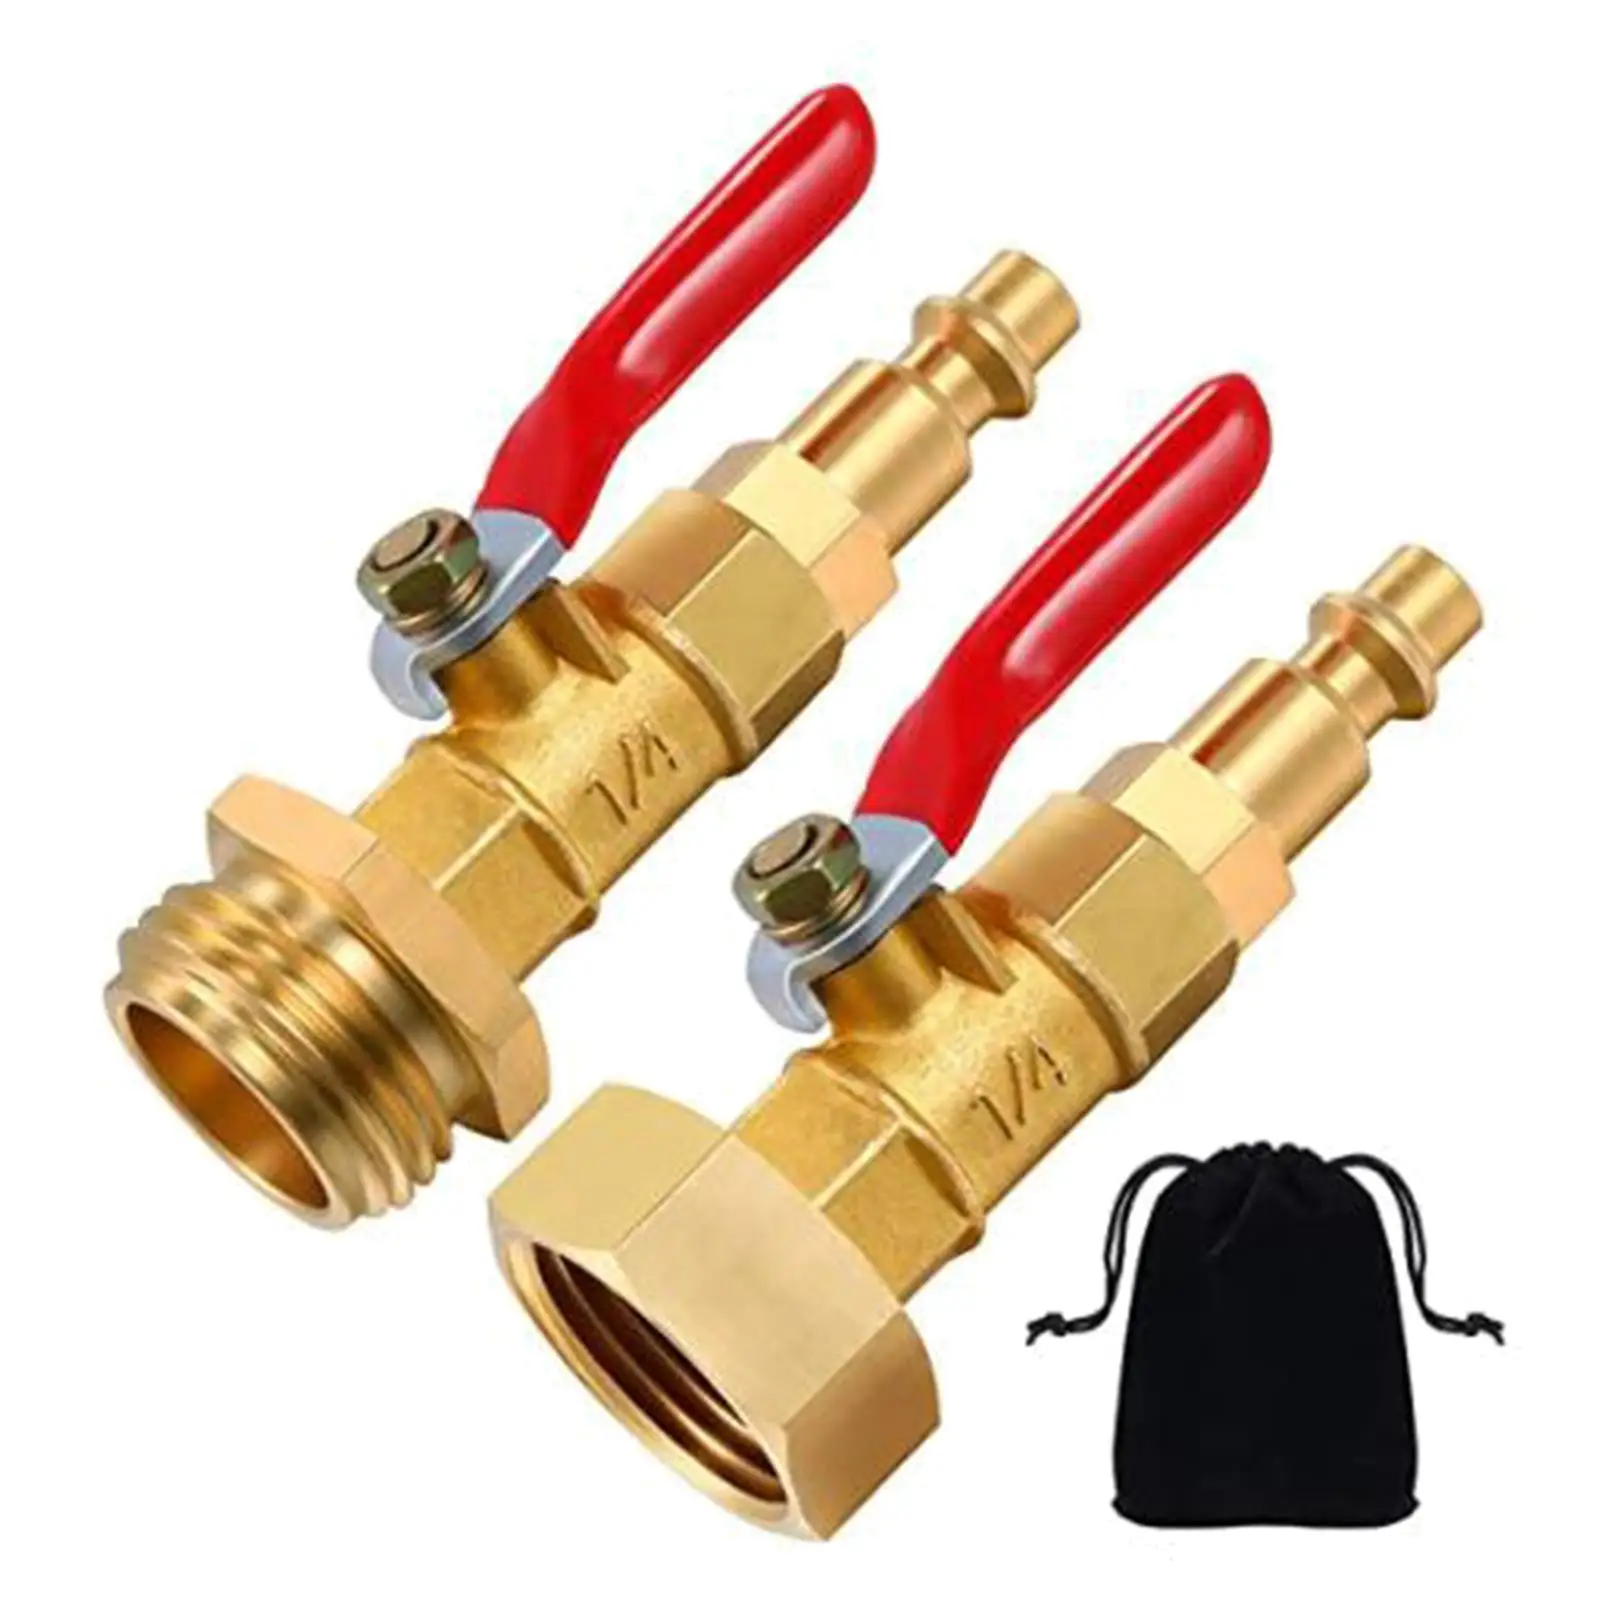 Winterize Blowout Adapter with 1/4 Inch  Connecting Plug and 3/4 Inch Male GHT Thread, Brass Winterizing Quick Adapter with 